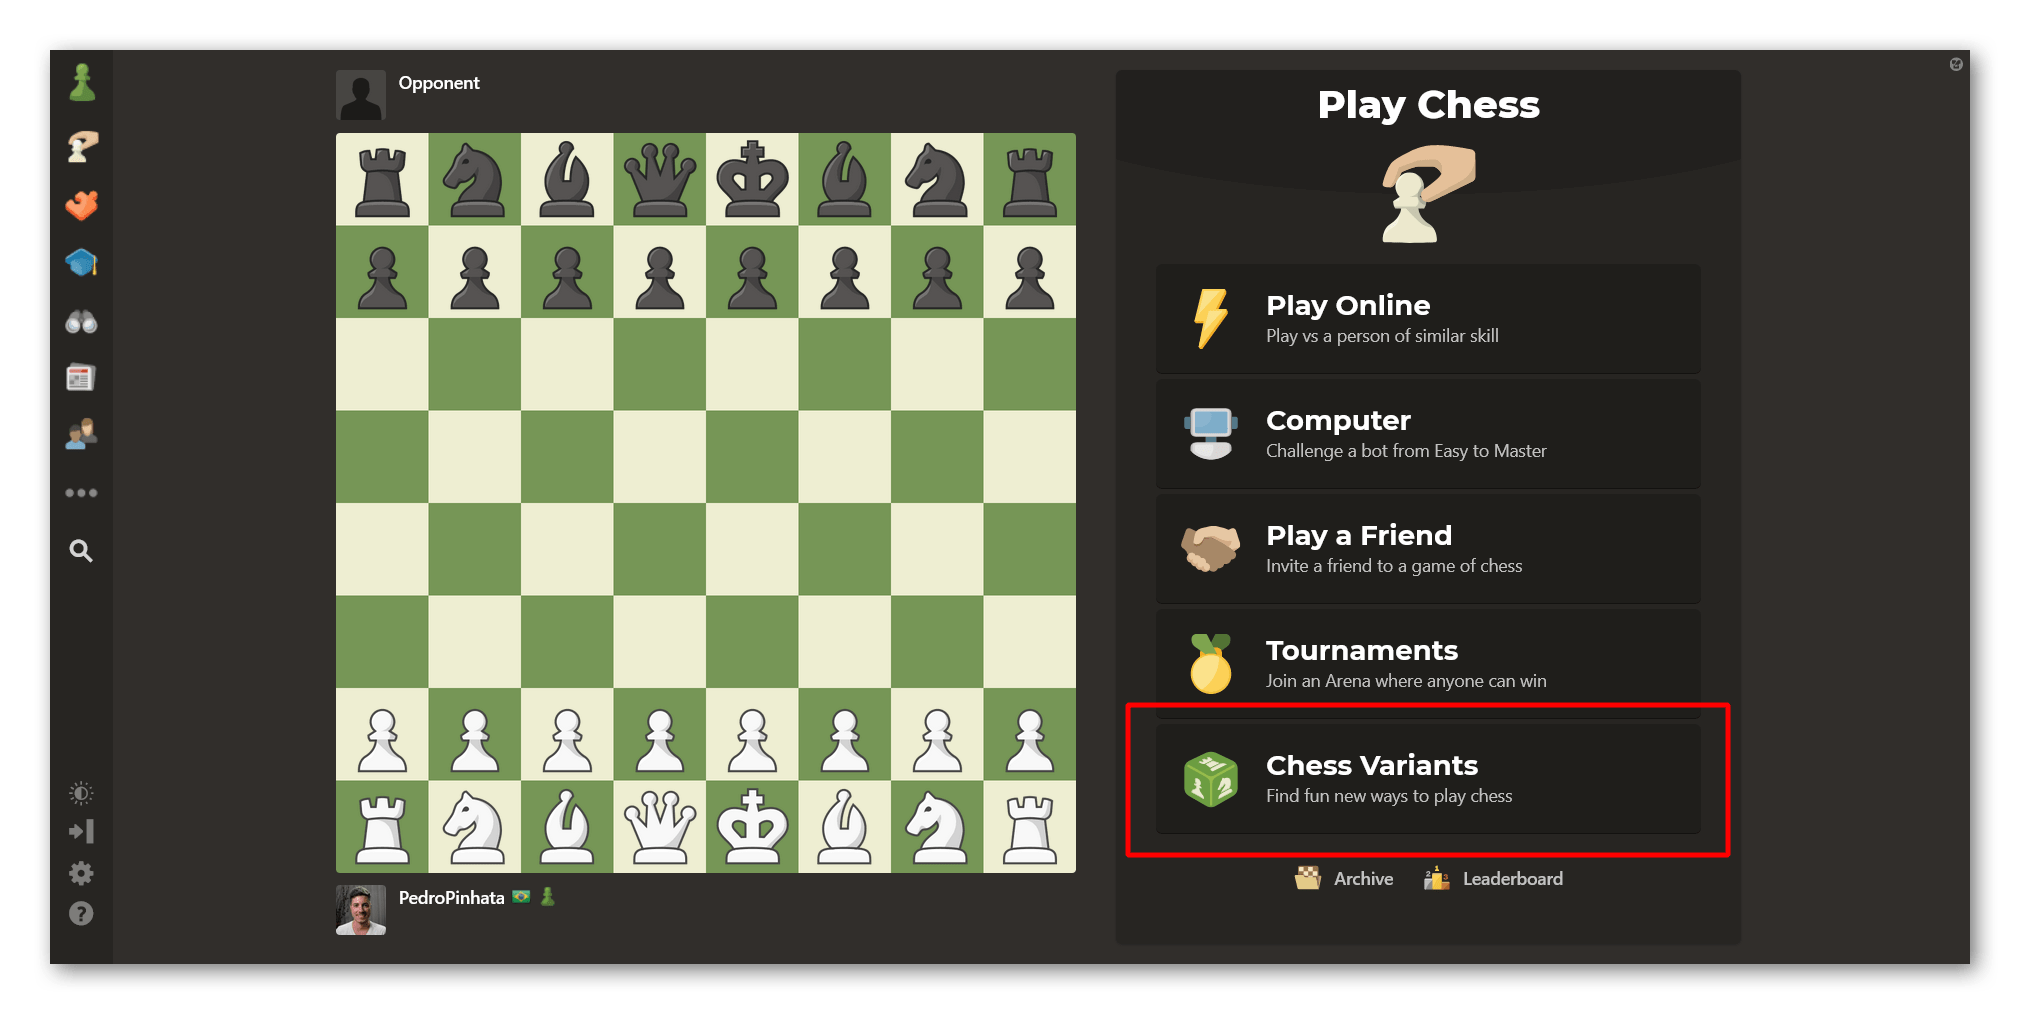 Play chess variants